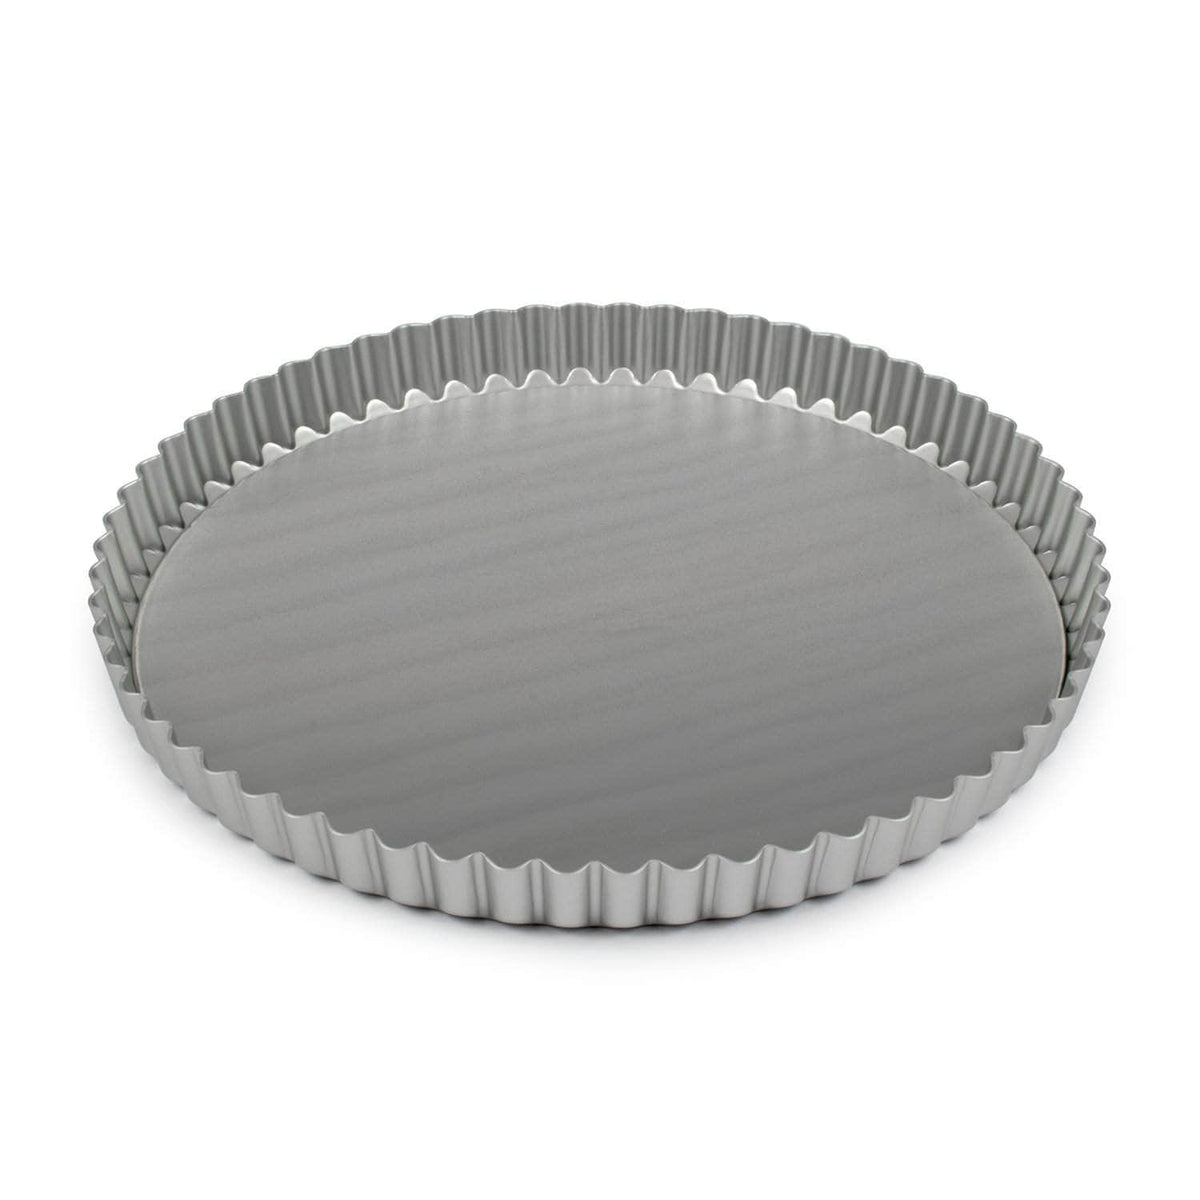 *New* Silver anodised fluted flan tin 10 inch